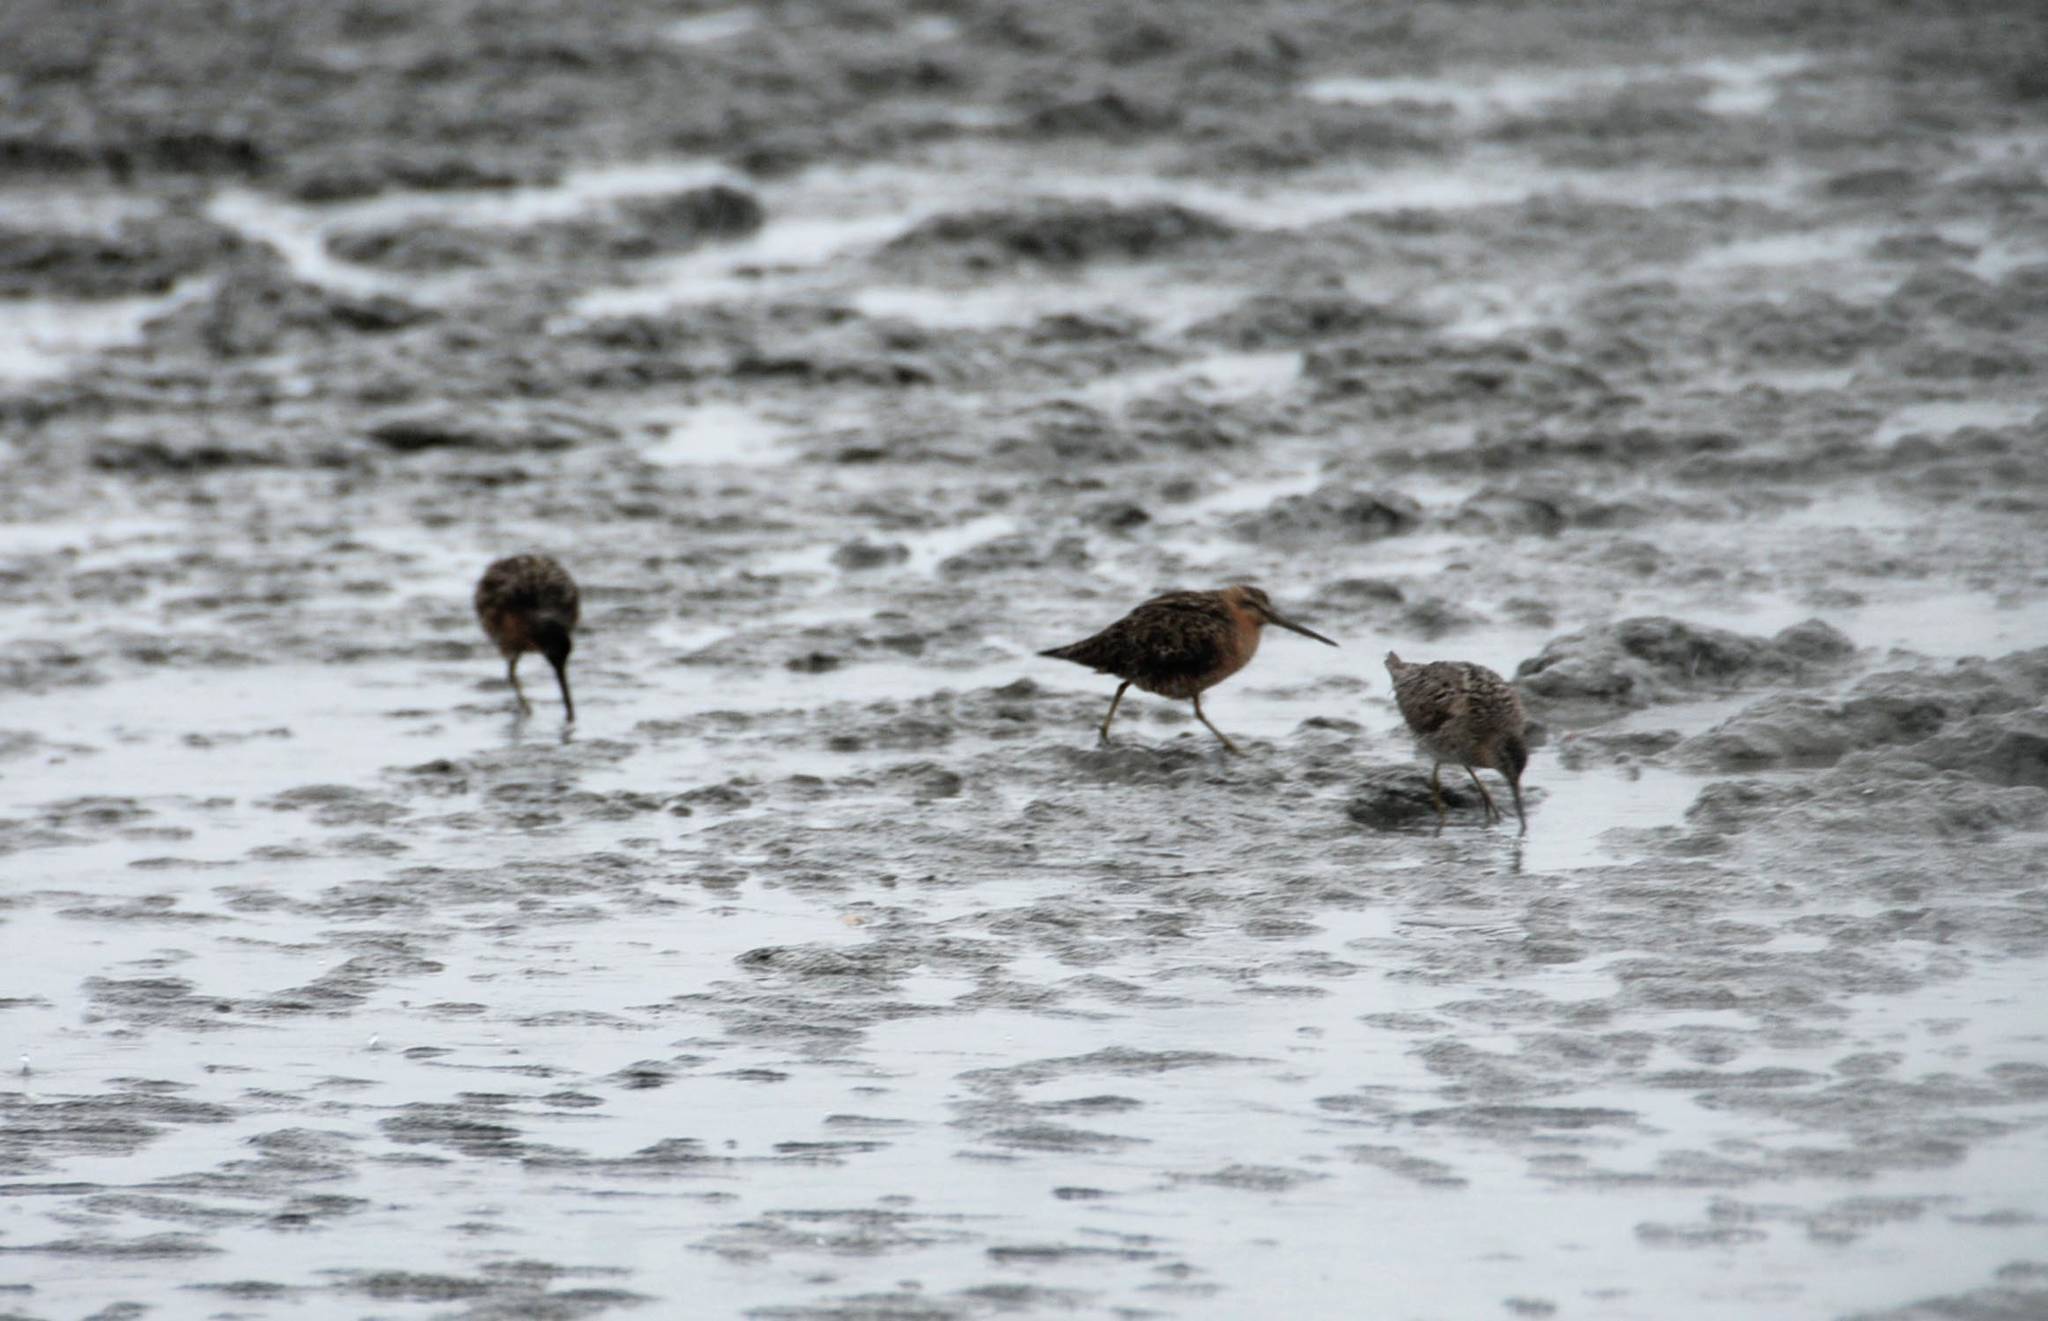 In this June 2016 photo, shorebirds search for food on a rainy day during low tide on the mud flats of the Kasilof River in Kasilof, Alaska. The Kasilof River is an important birding area throughout the year. (Photo by Elizabeth Earl/Peninsula Clarion, file)